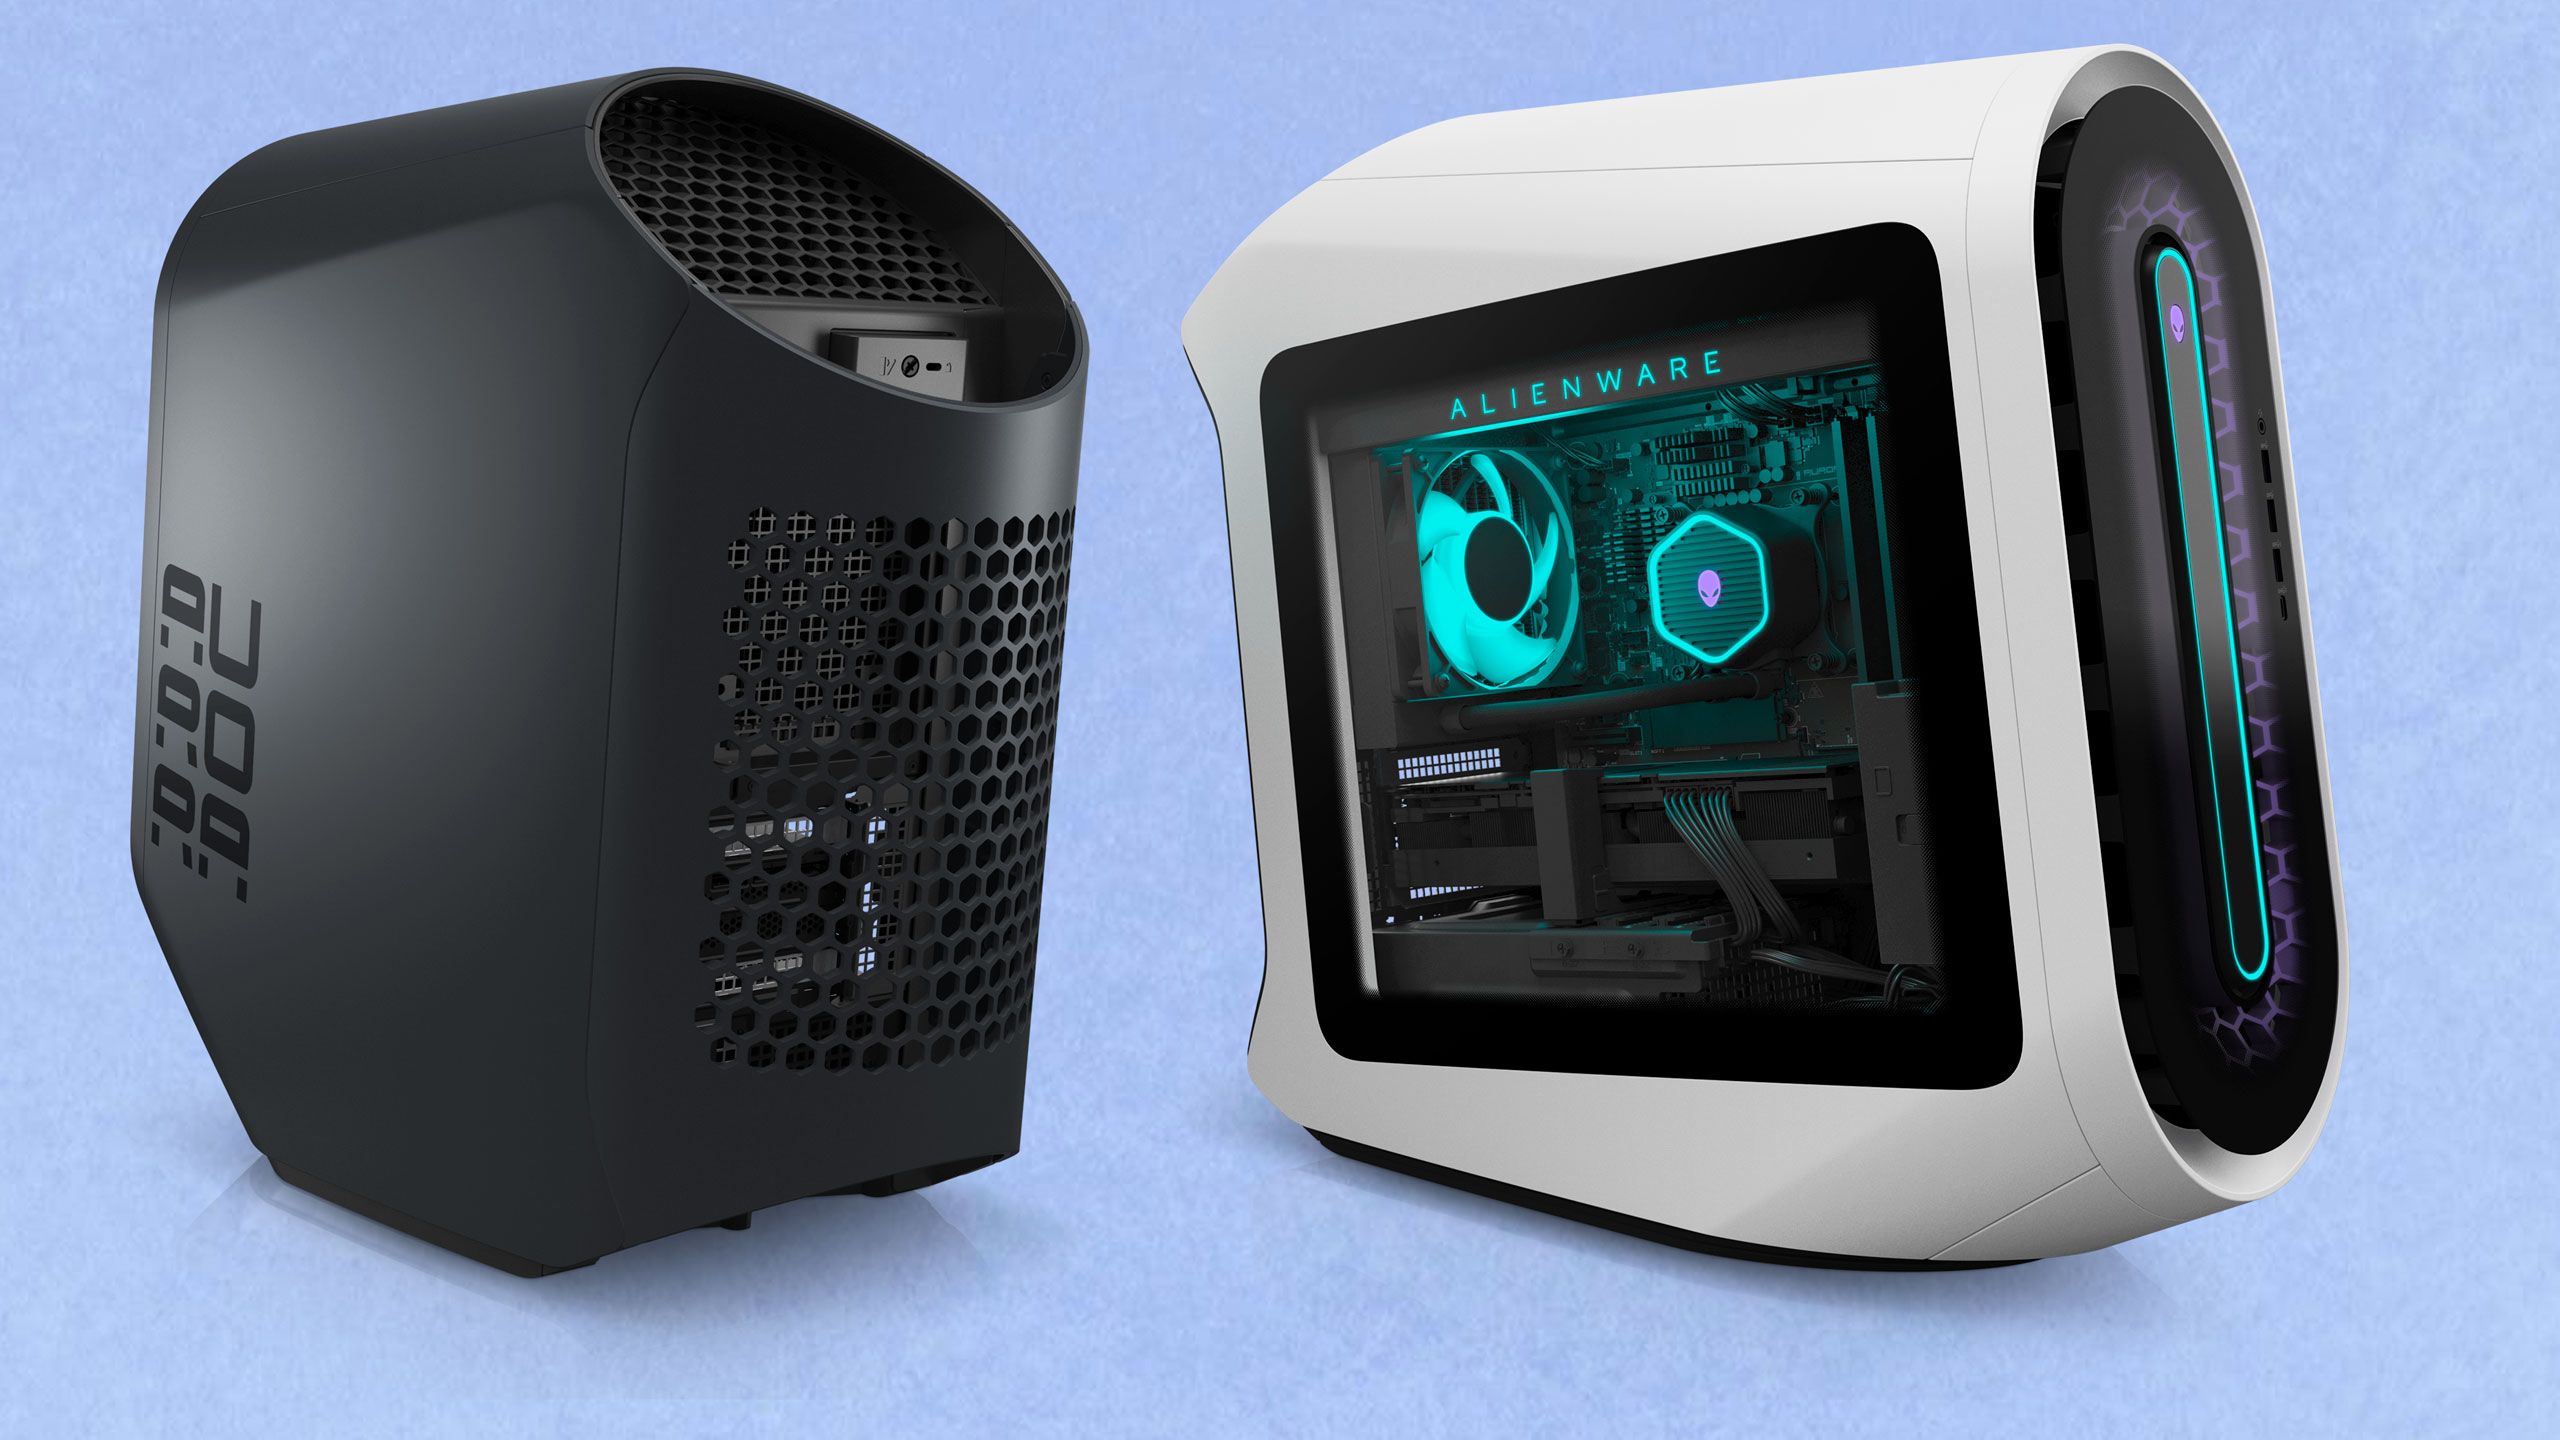 Alienware Aurora Gets Redesigned for Company's 25th Anniversary | Tom's Hardware